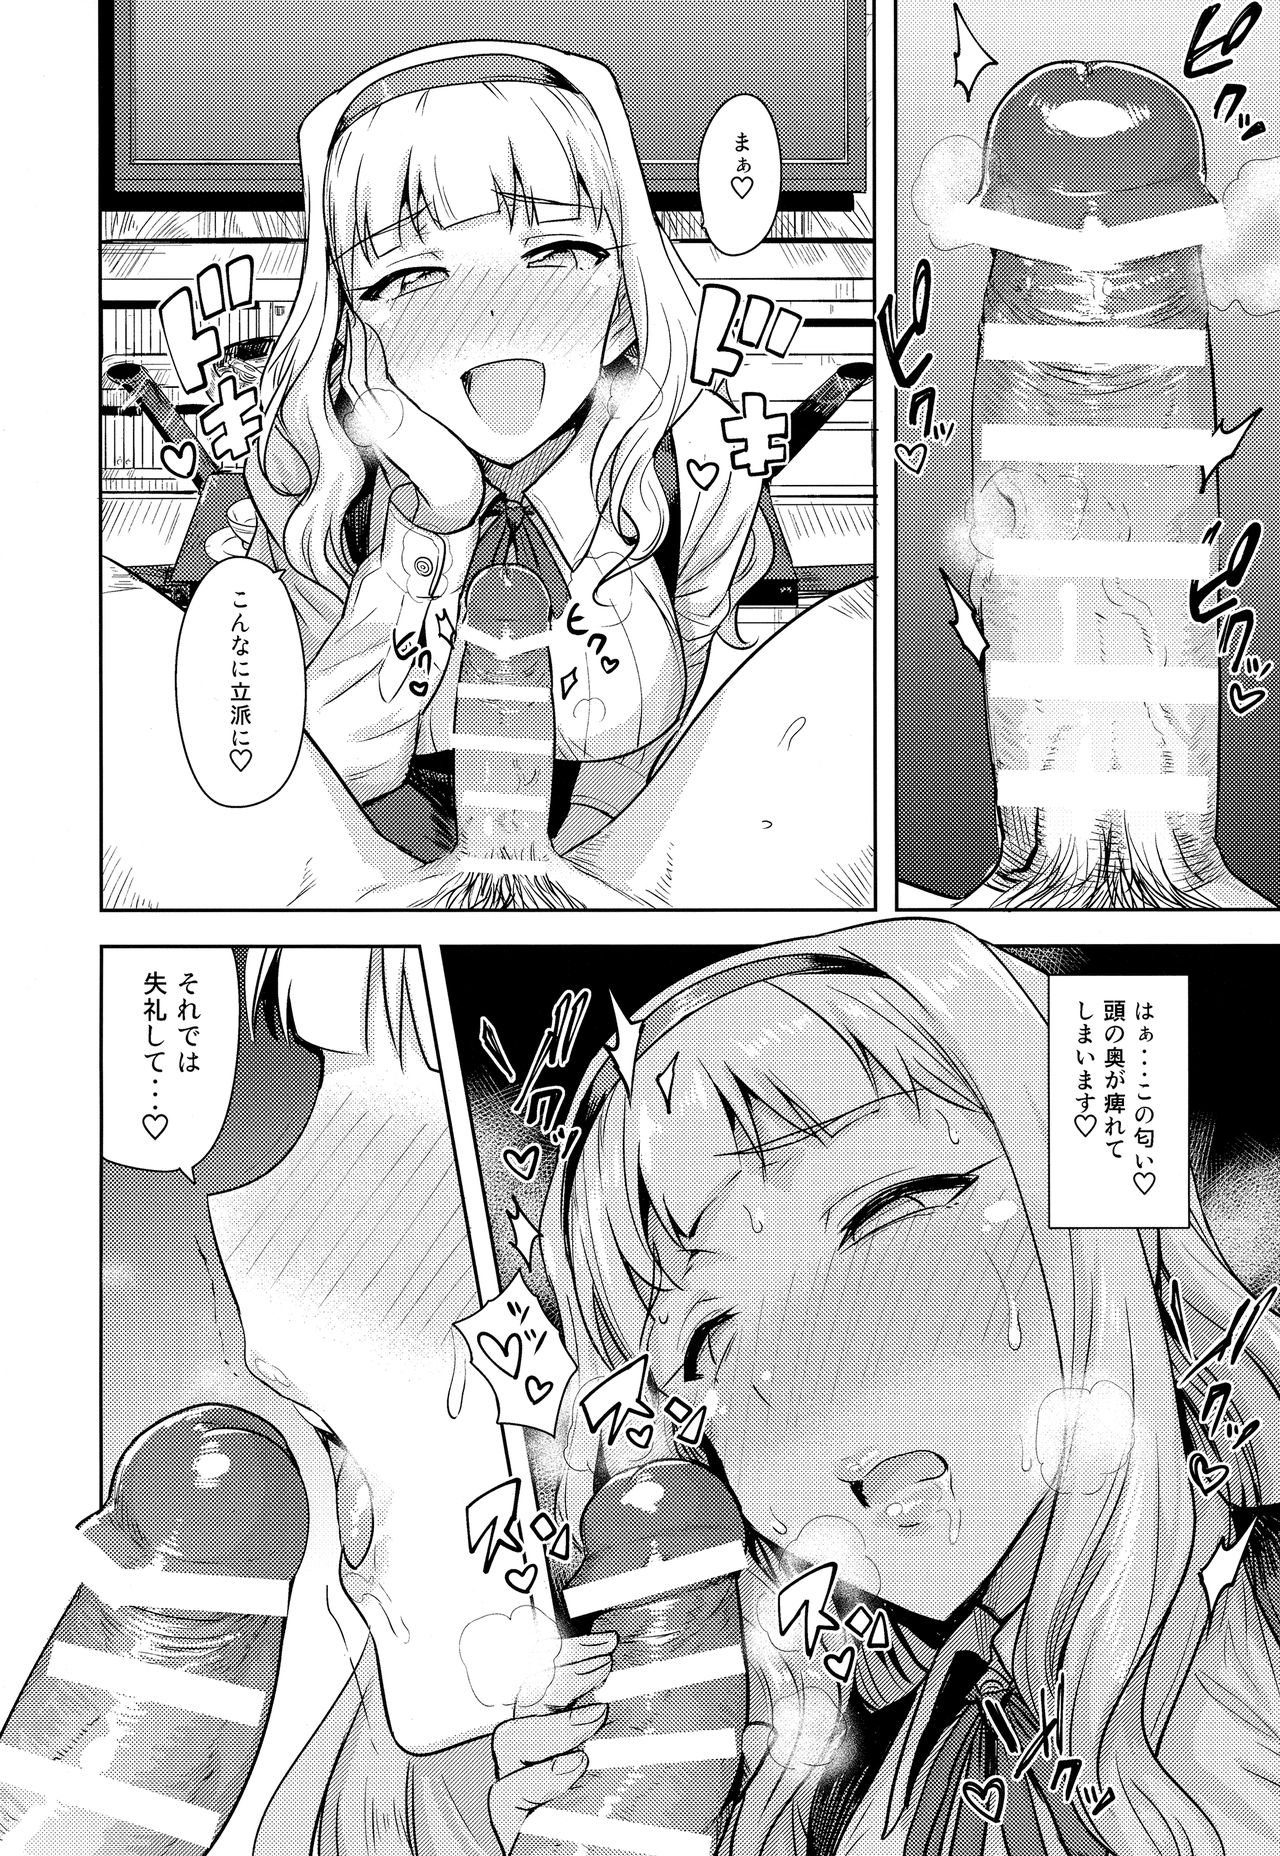 [PLANT (Tsurui)] SWEET MOON 2 (THE IDOLM@STER) page 13 full